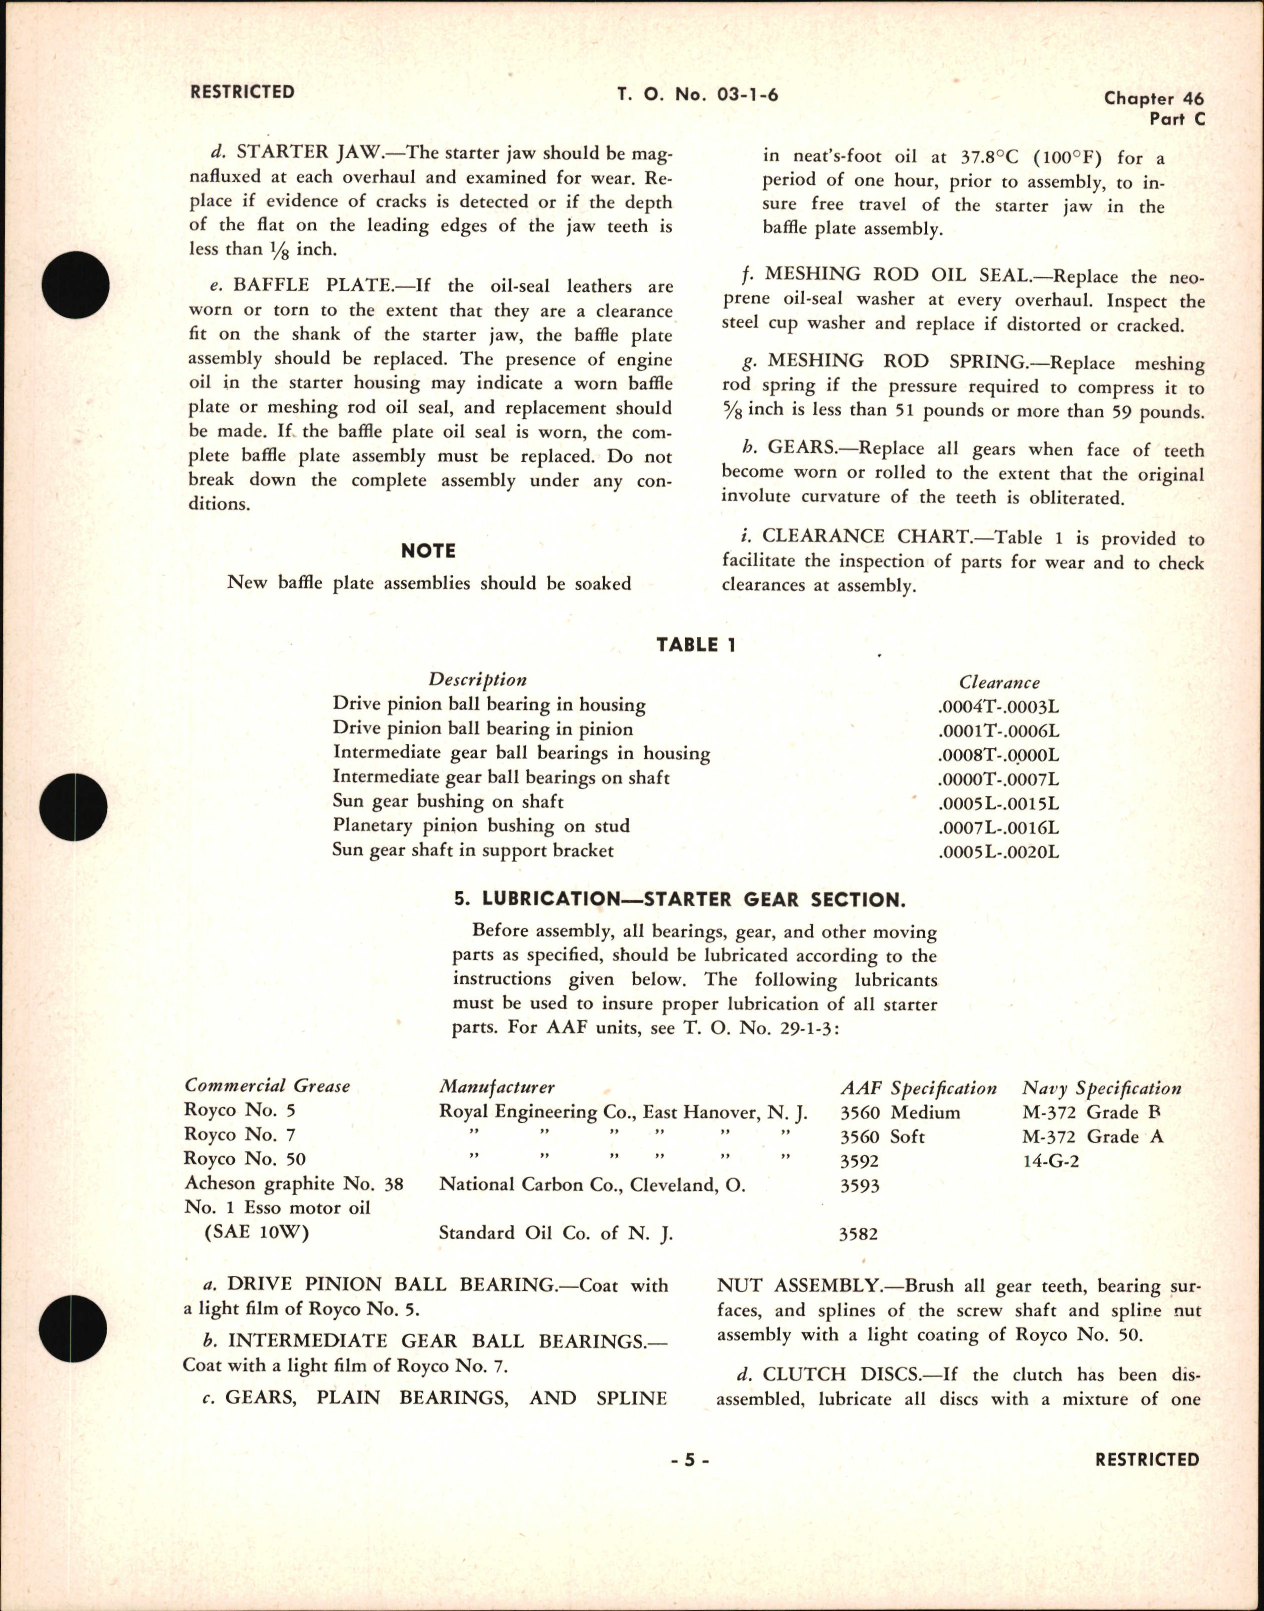 Sample page 5 from AirCorps Library document: Overhaul Instructions for Direct Cranking Electric Starters, Chapter 46 Part C